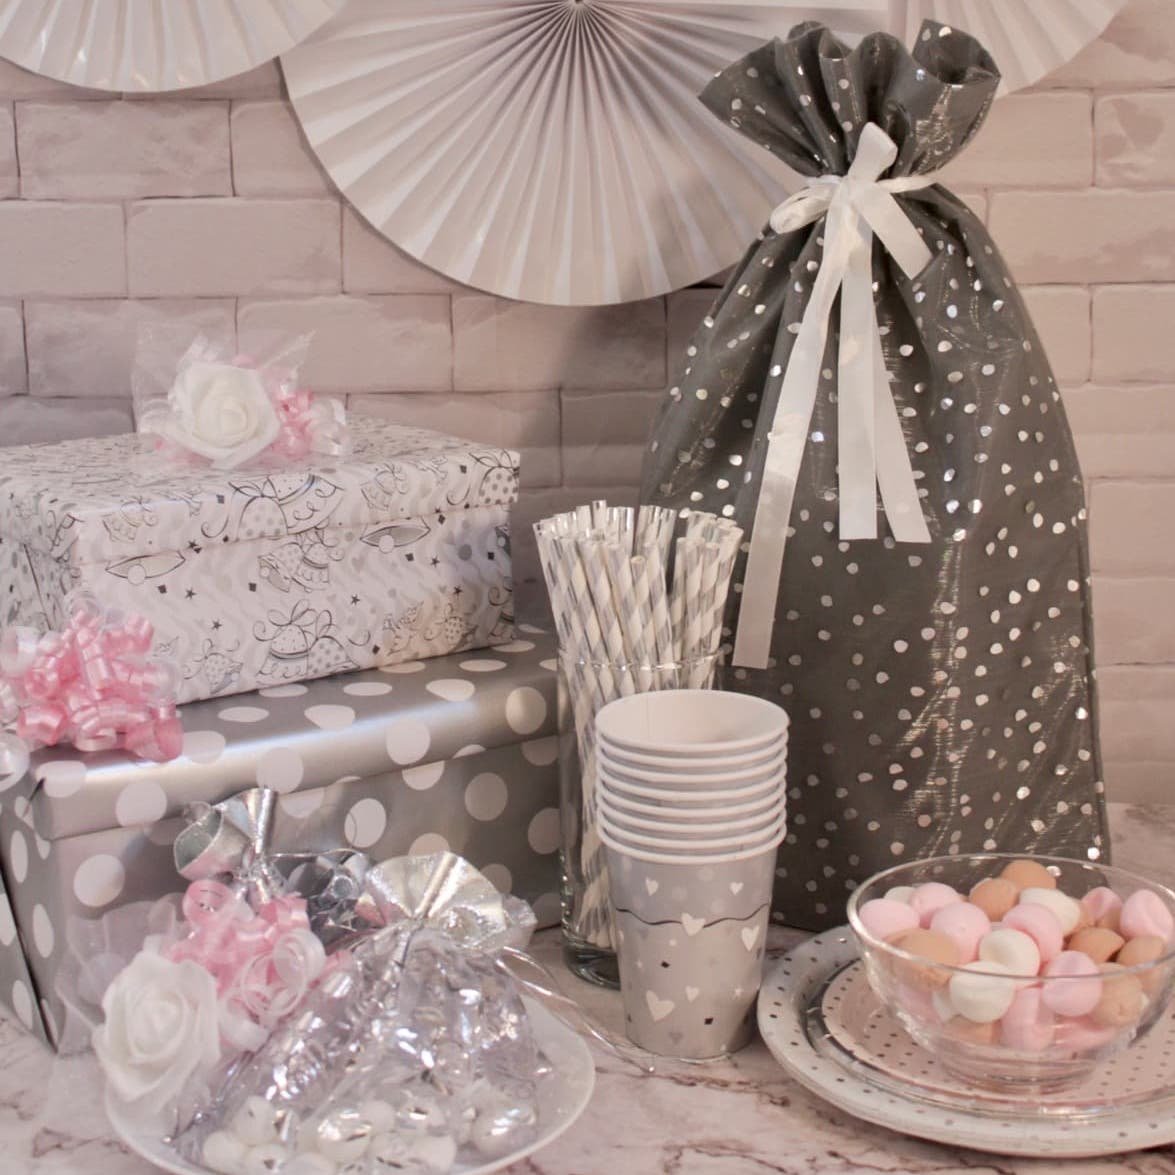 Bridal Shower Ideas: Planning Themes, Activities and Food